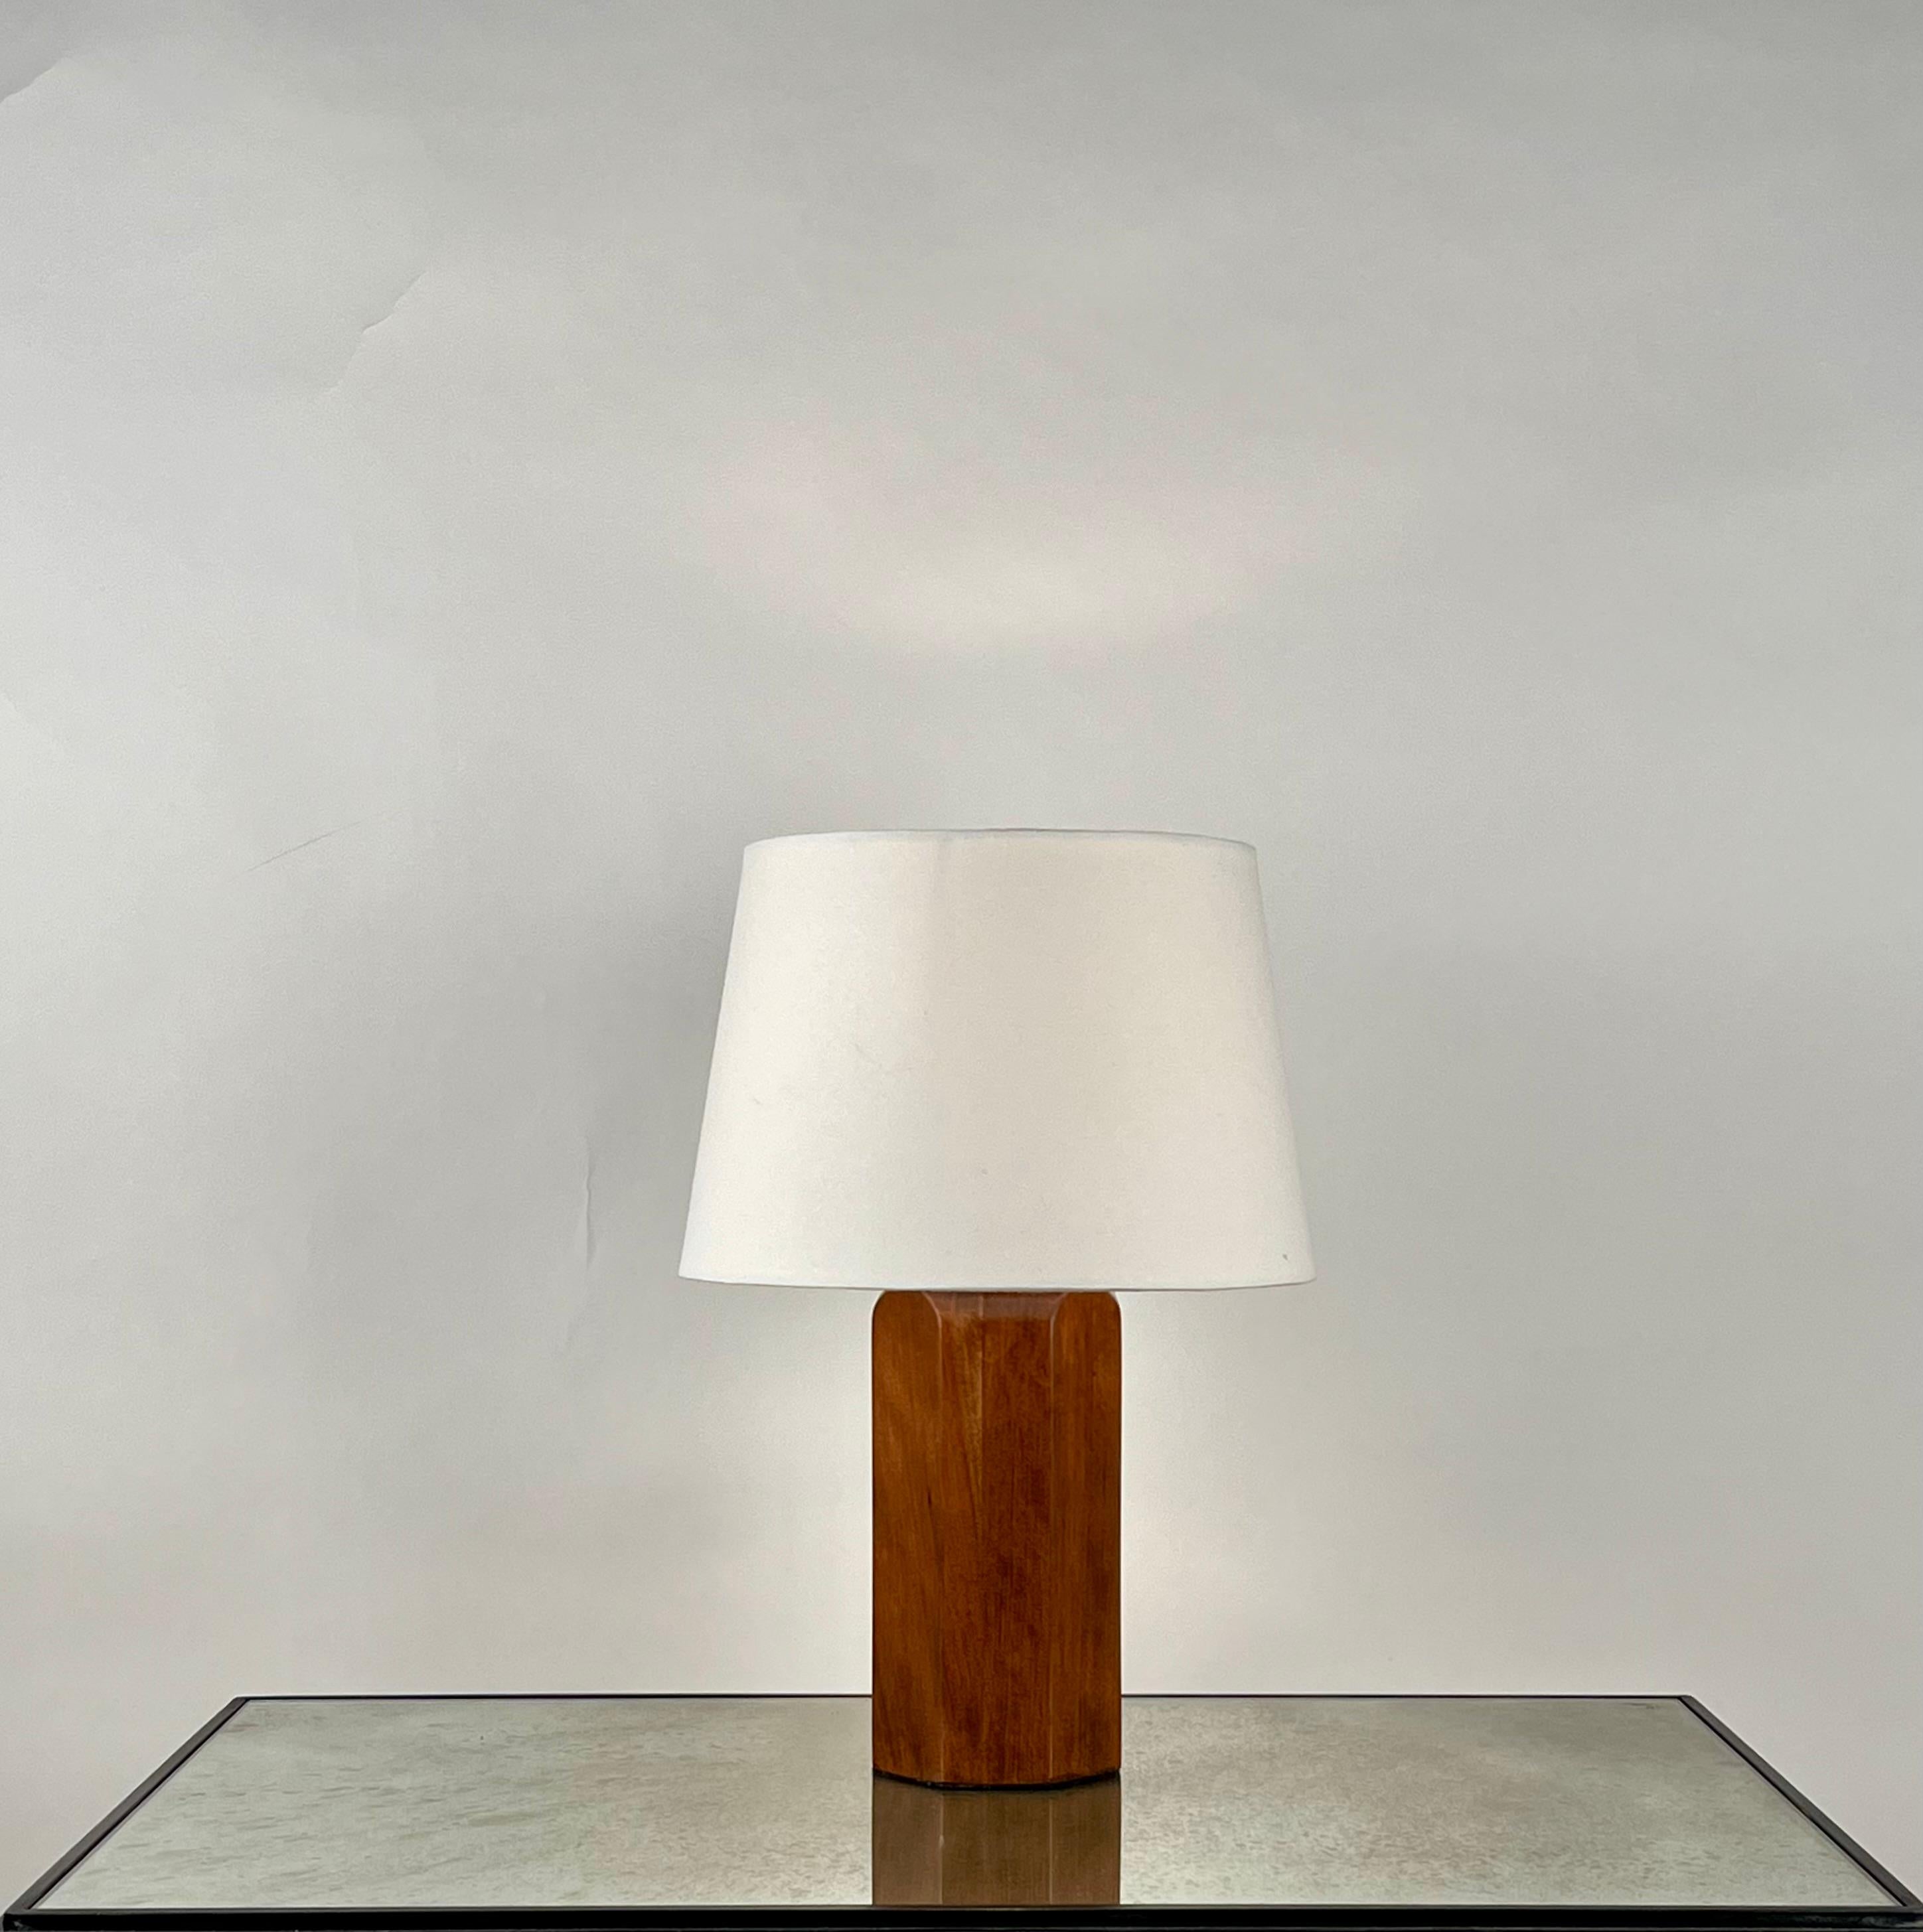 'Octogone' walnut table lamp with parchment shade by DESIGN FRÈRES®.

Attractive, understated combination of a polished walnut geometric base and European style parchment shade (no harp or finial).

Dimensions listed are with the shade on.

Wired